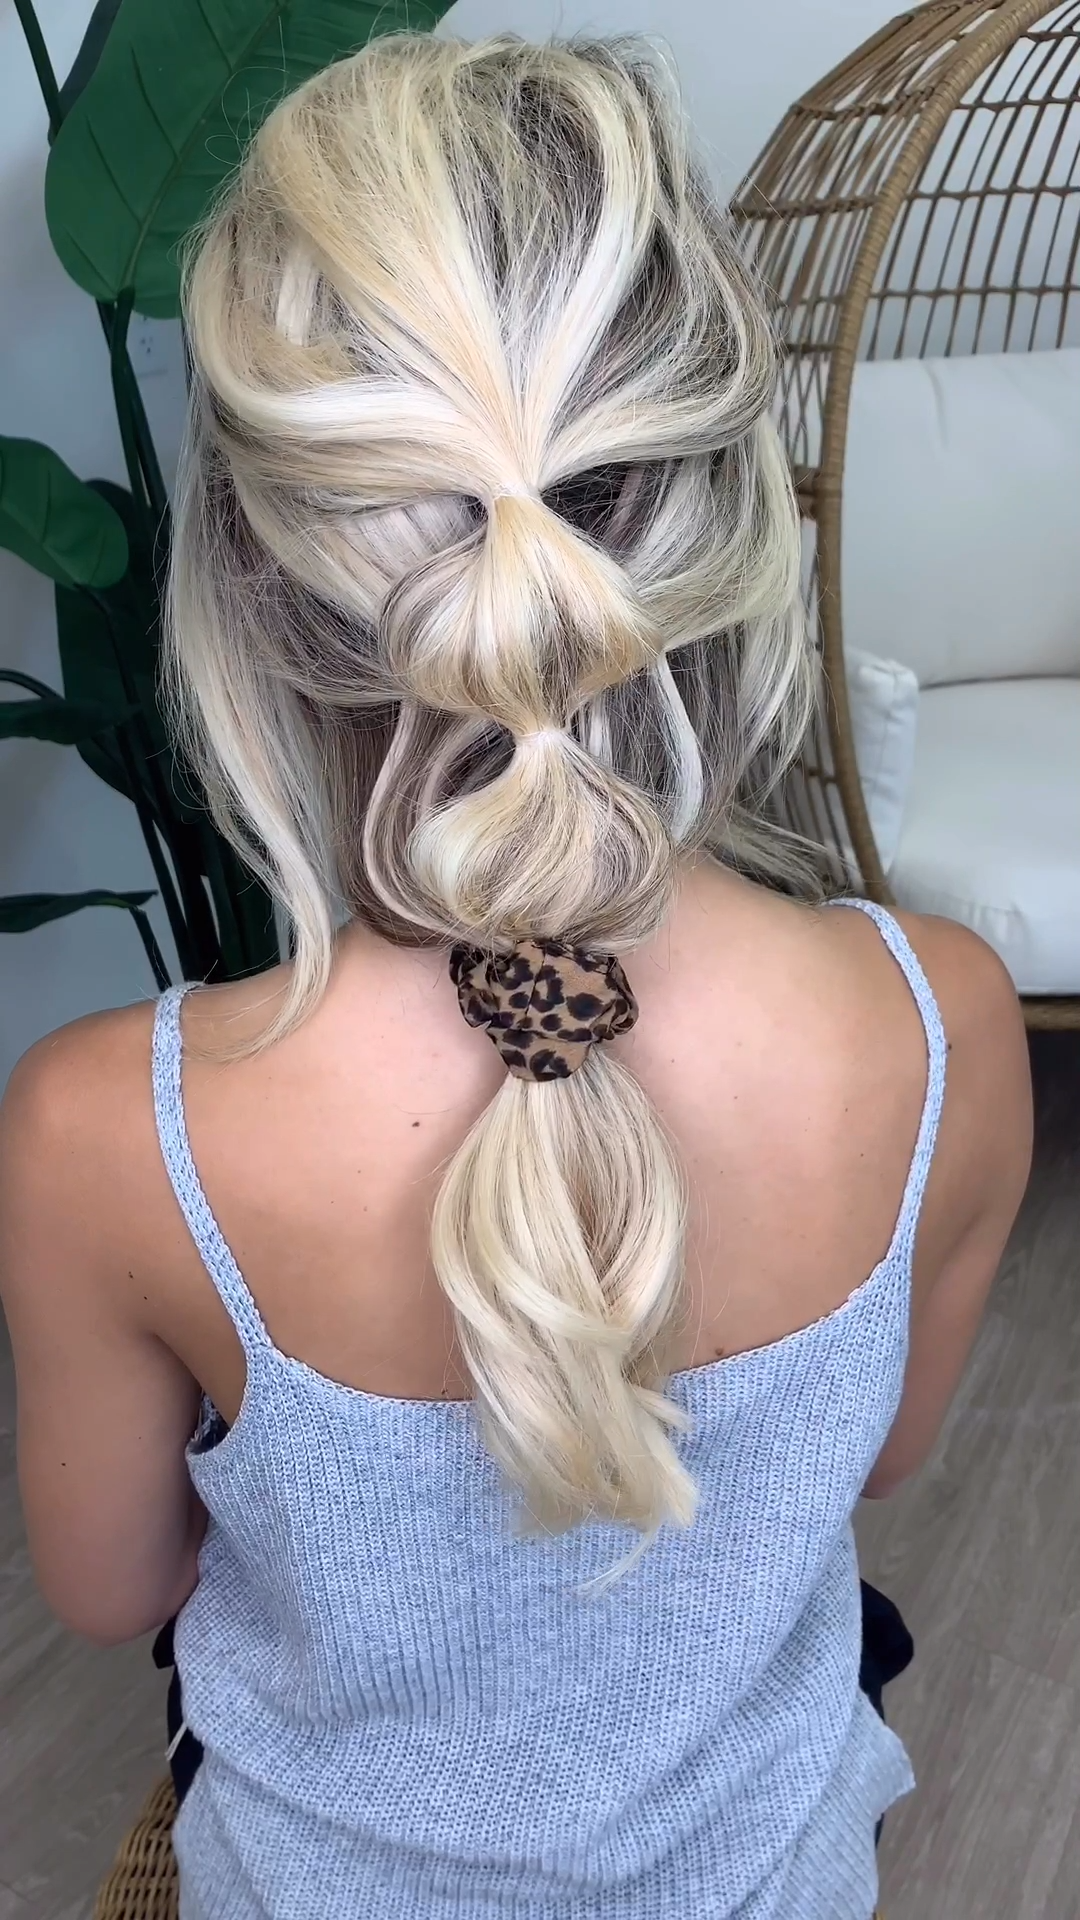 Easy Bubble Braid with Scrunchie -   13 hairstyles Braided tutorial ideas